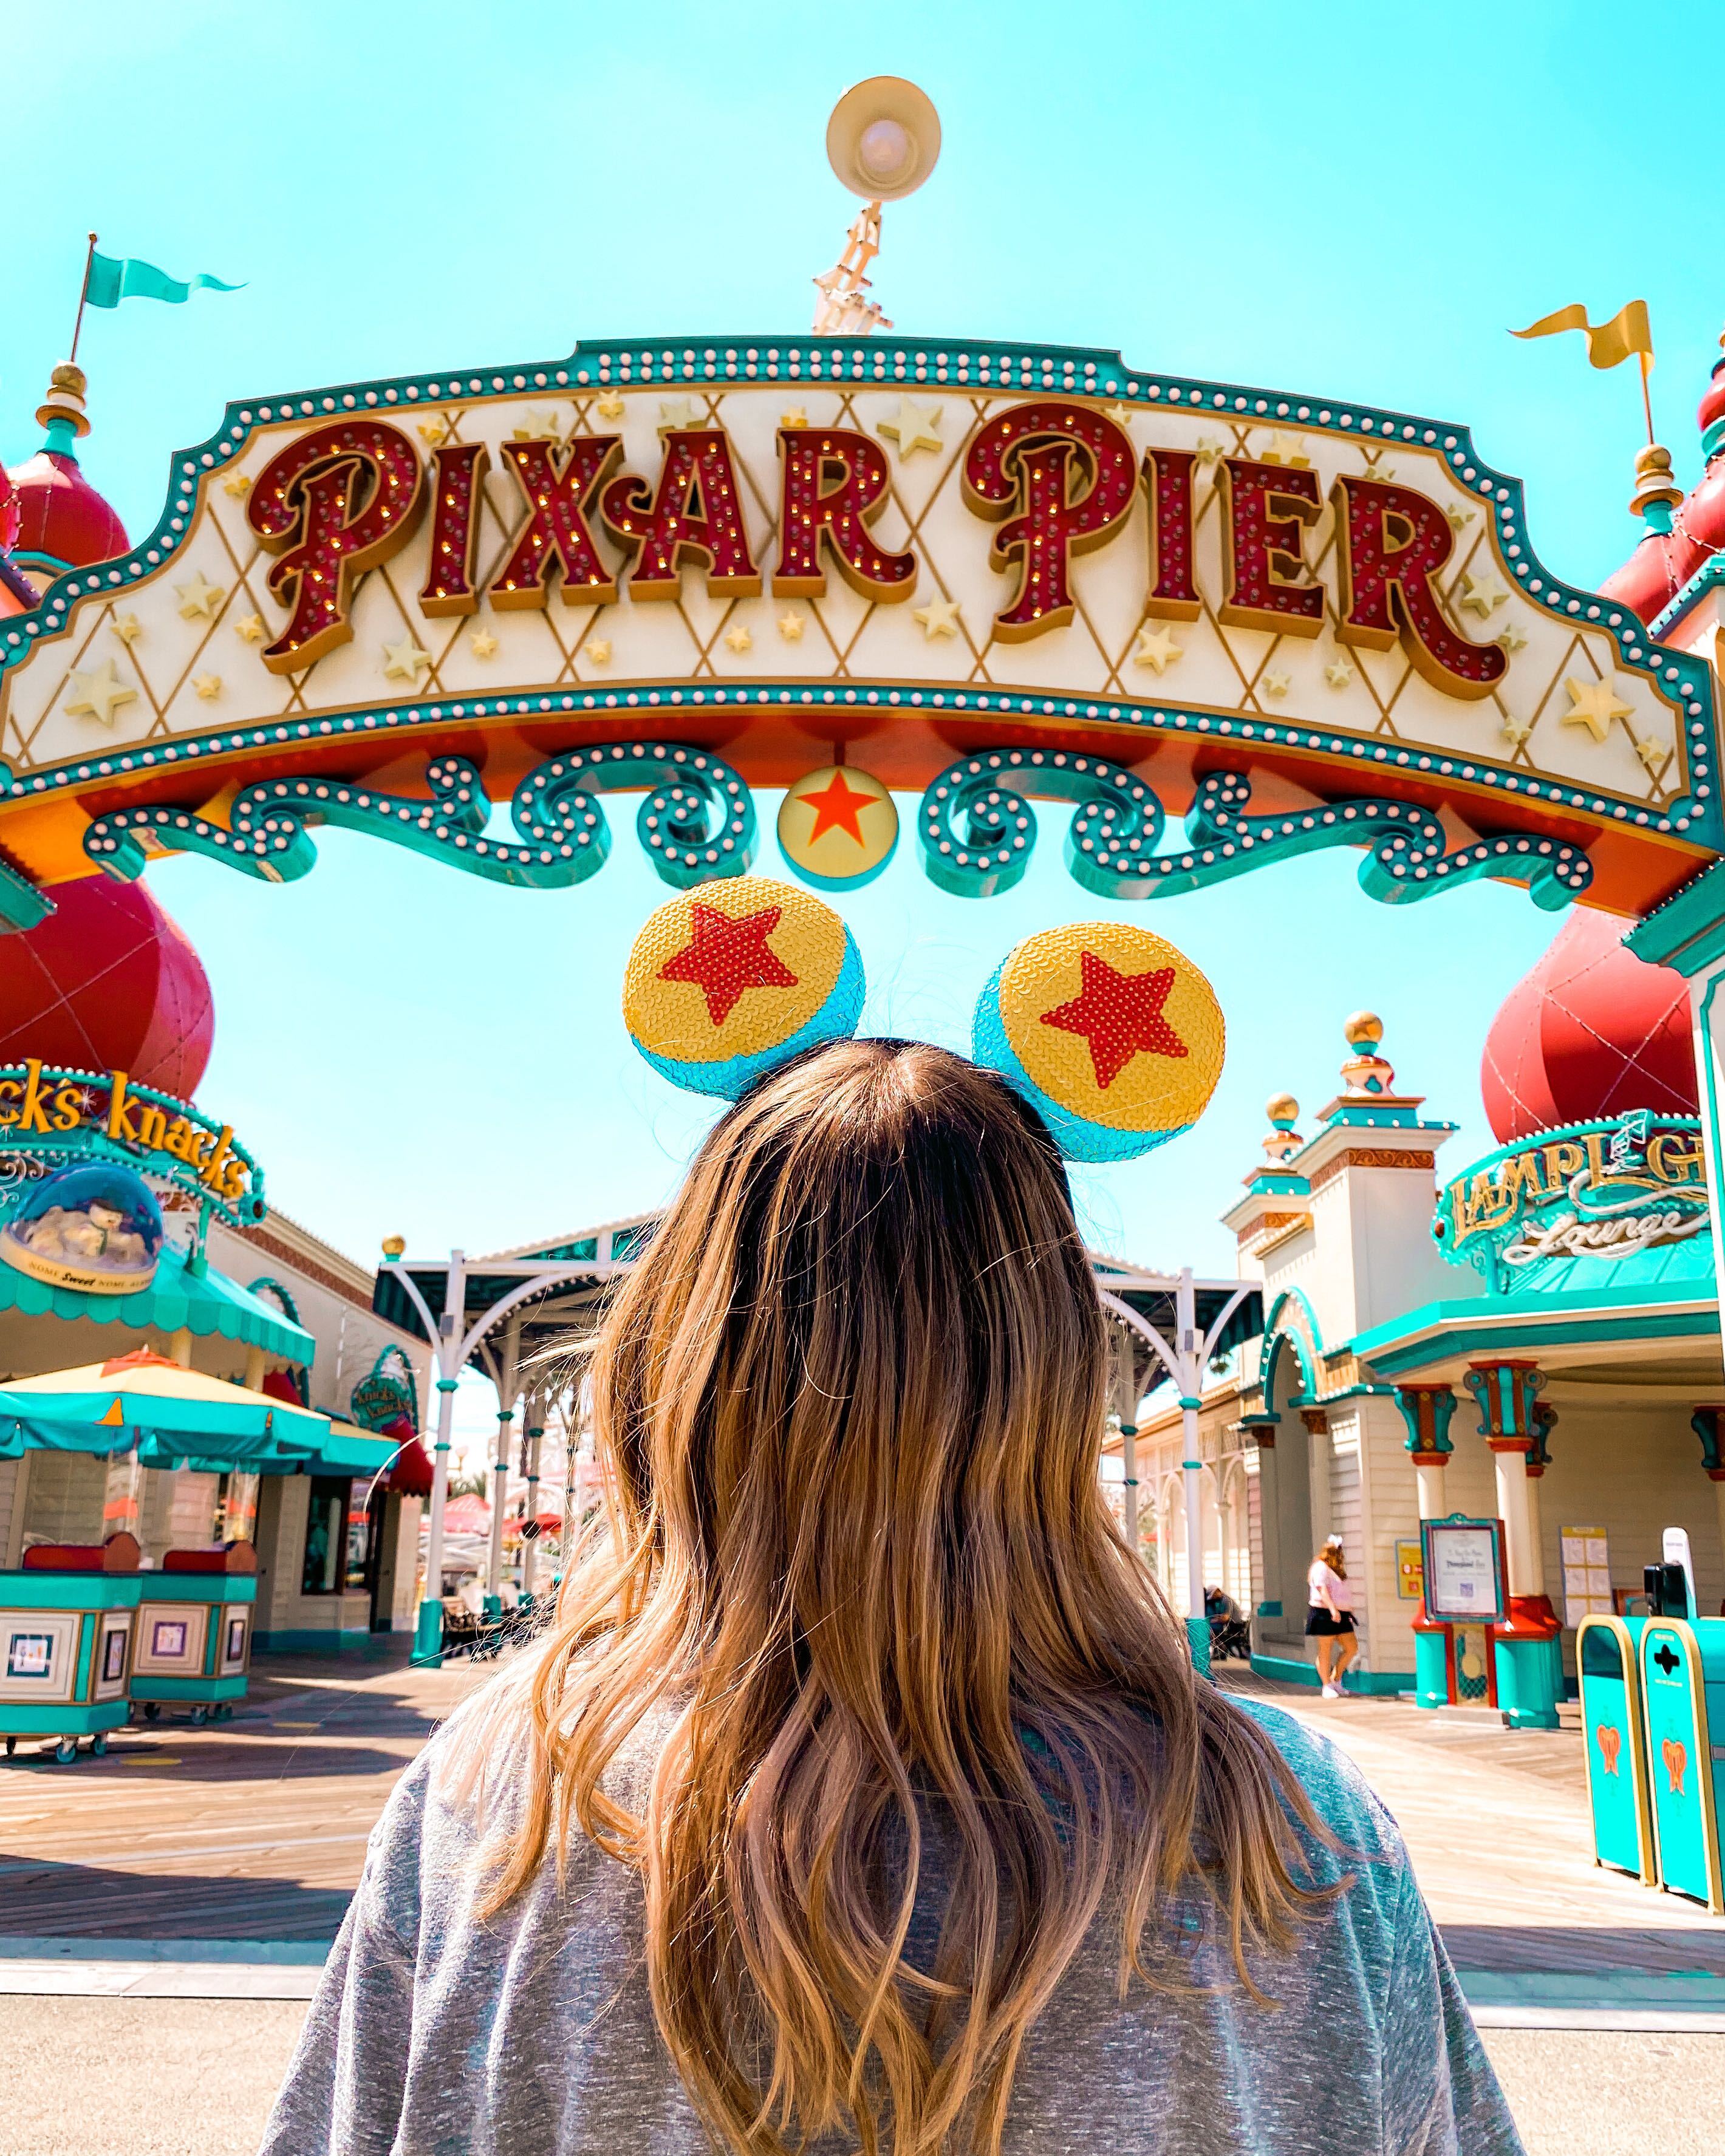 The entrance to Pixar Pier with a girl standing in front of it - Disneyland